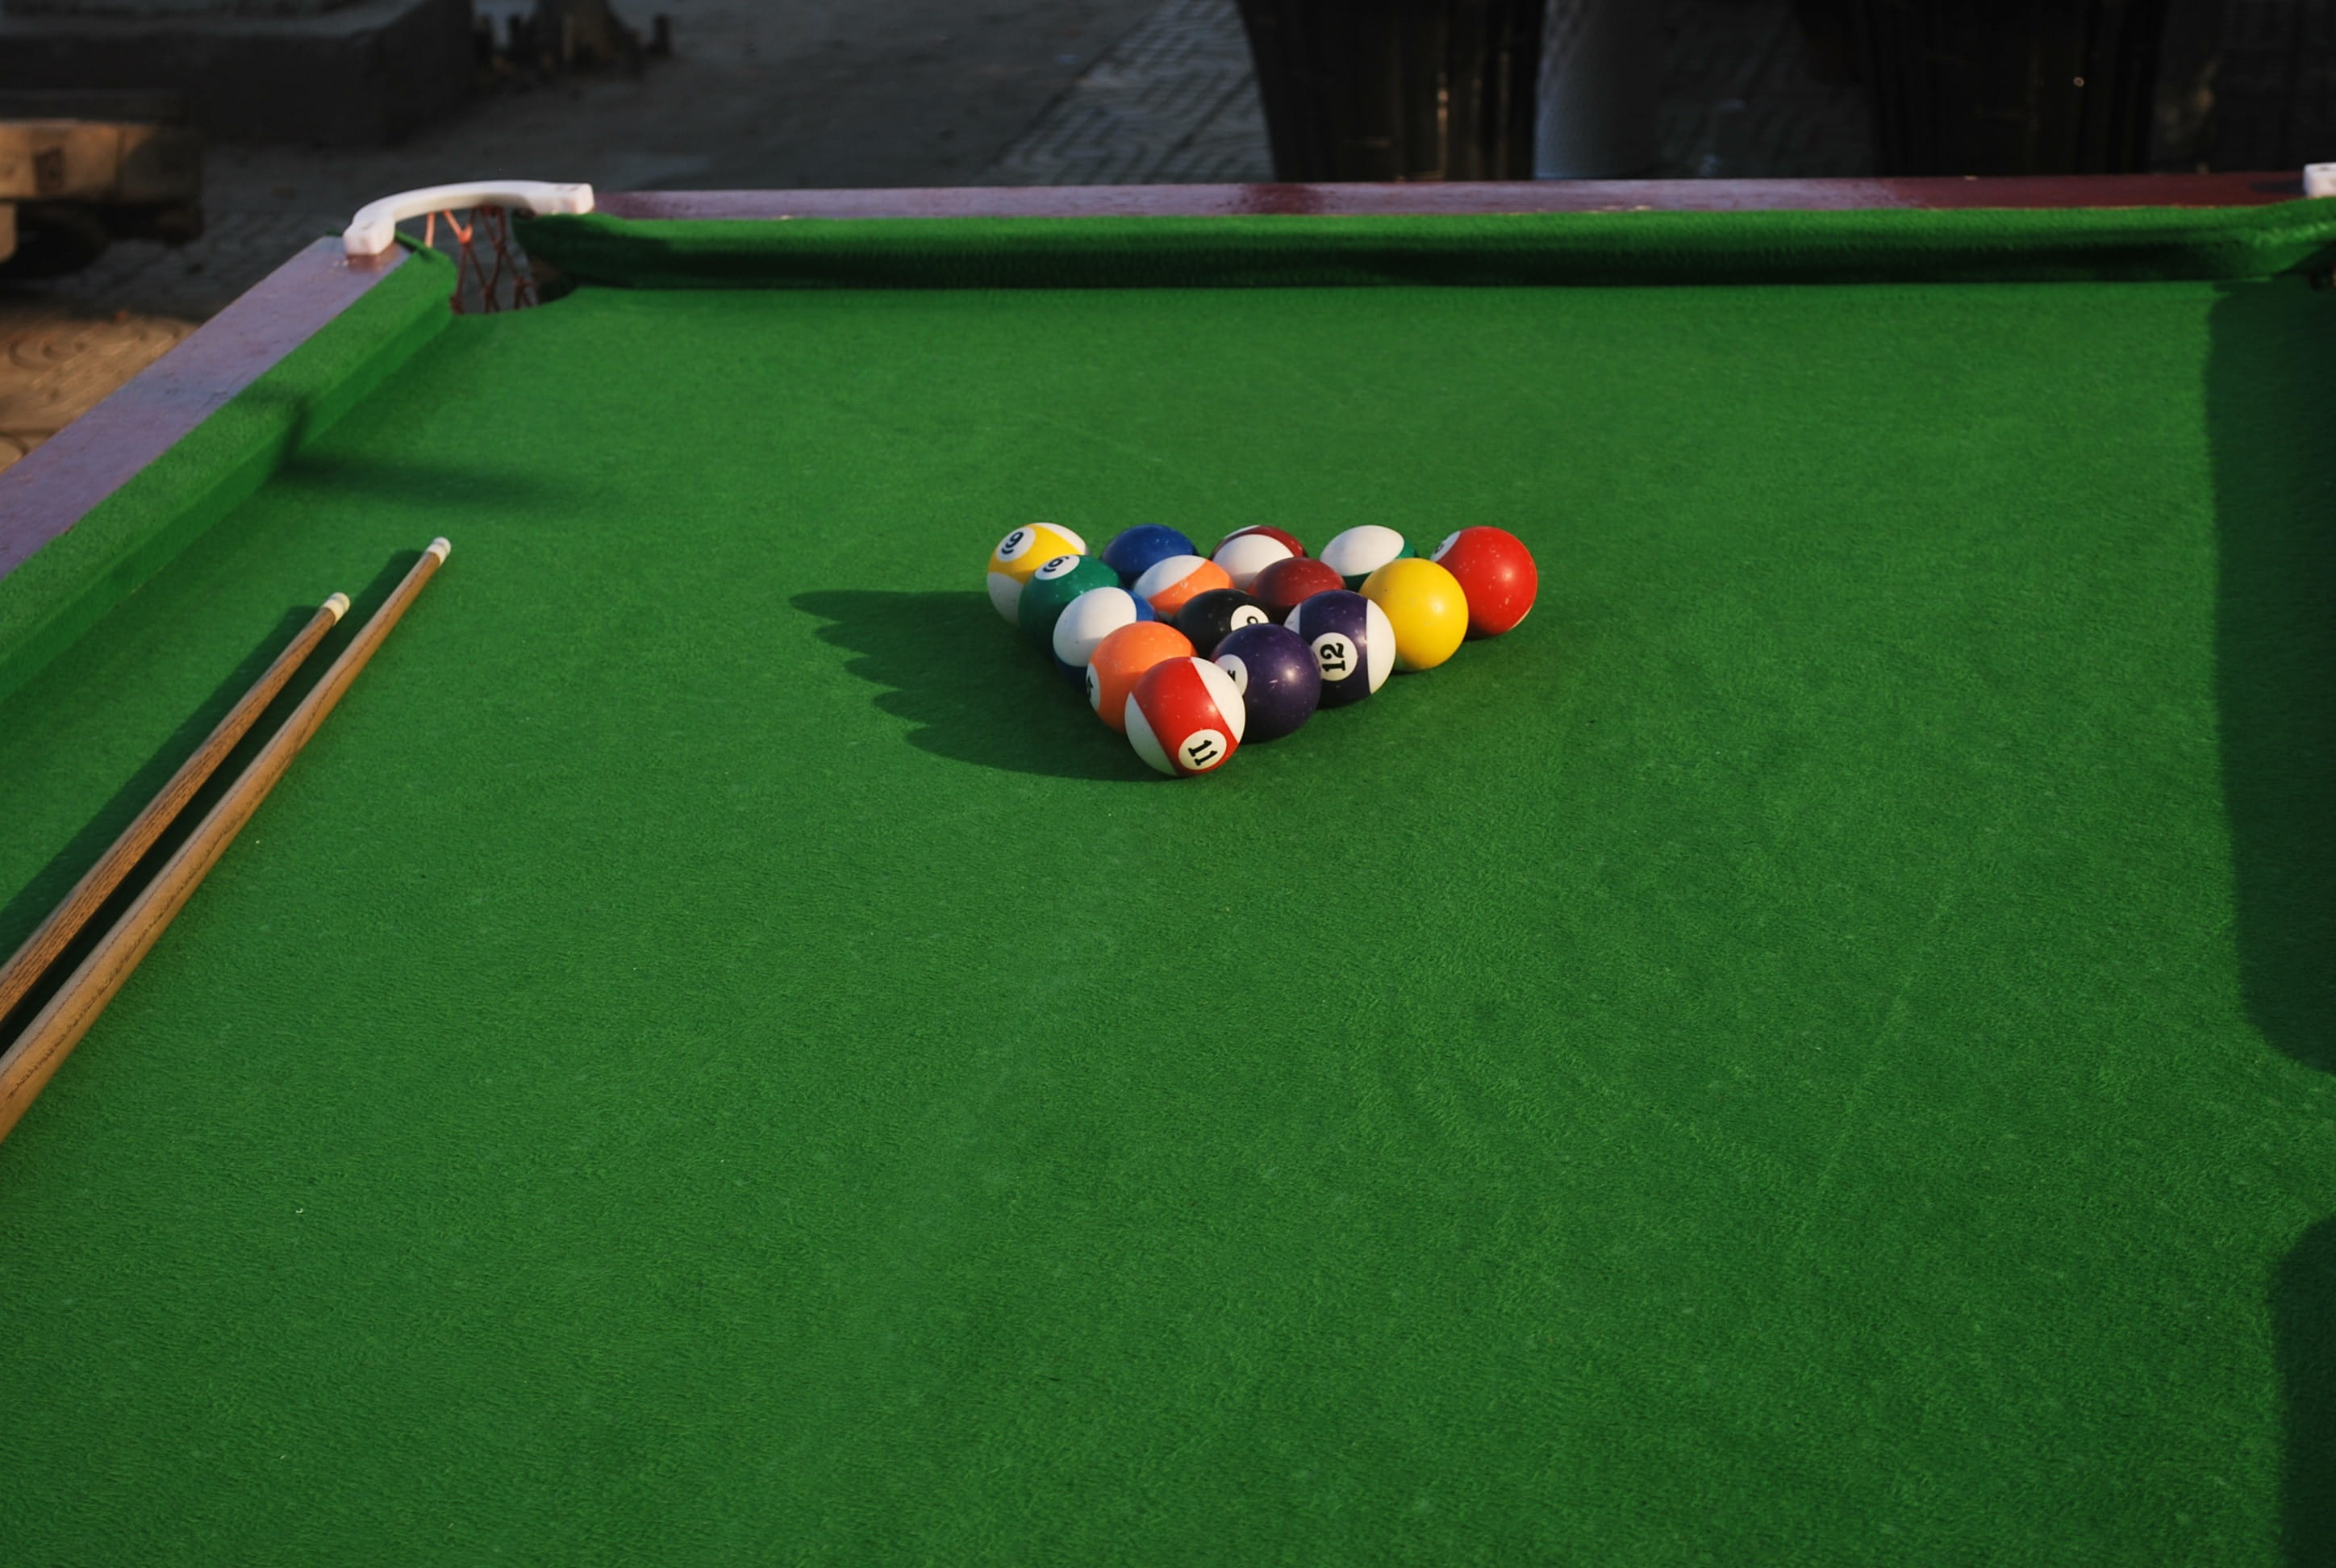 pool table with balls and cue sticks, Pool, Table, Billiards